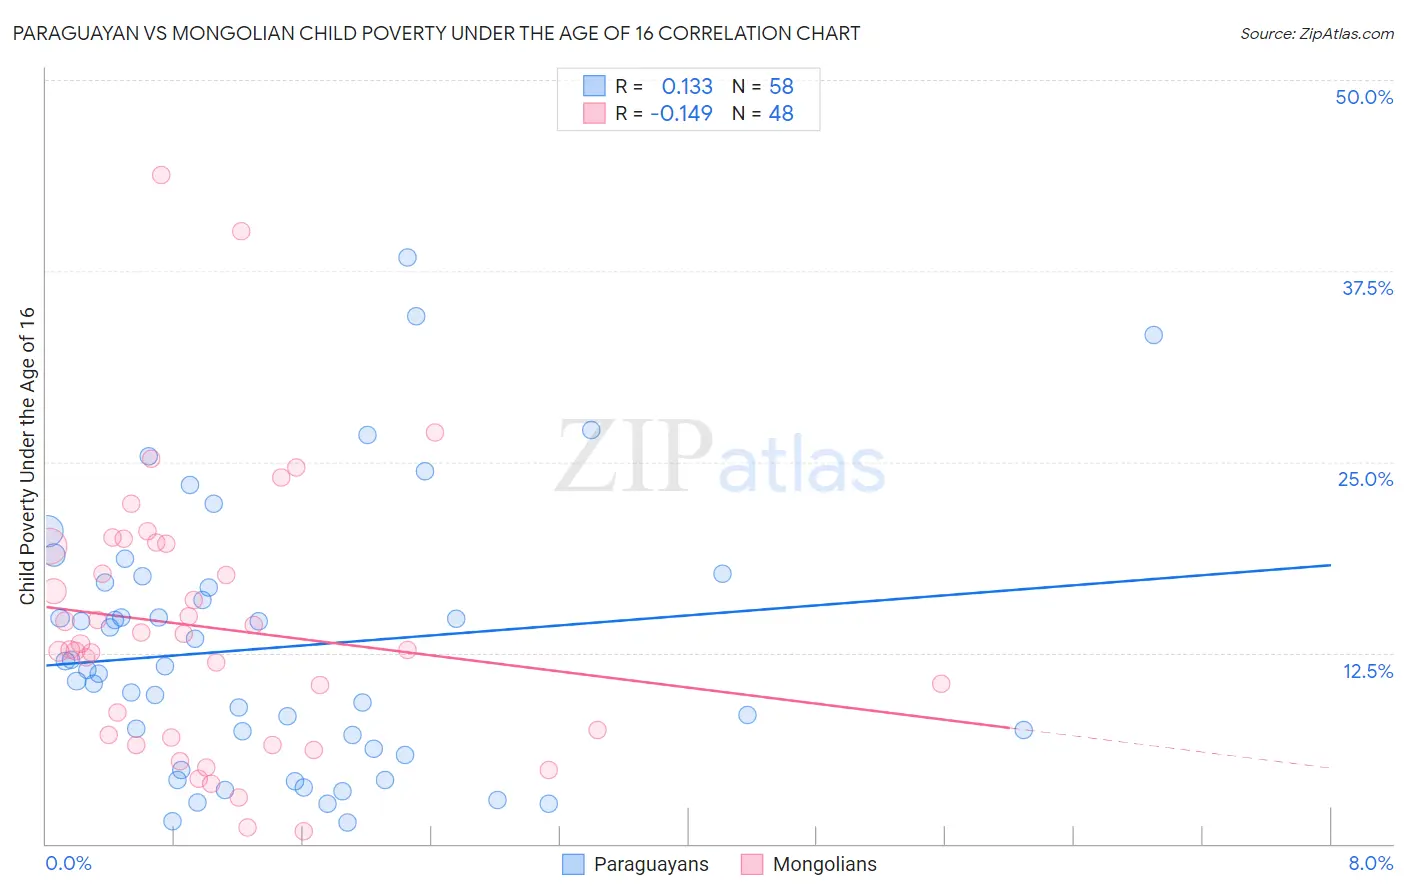 Paraguayan vs Mongolian Child Poverty Under the Age of 16